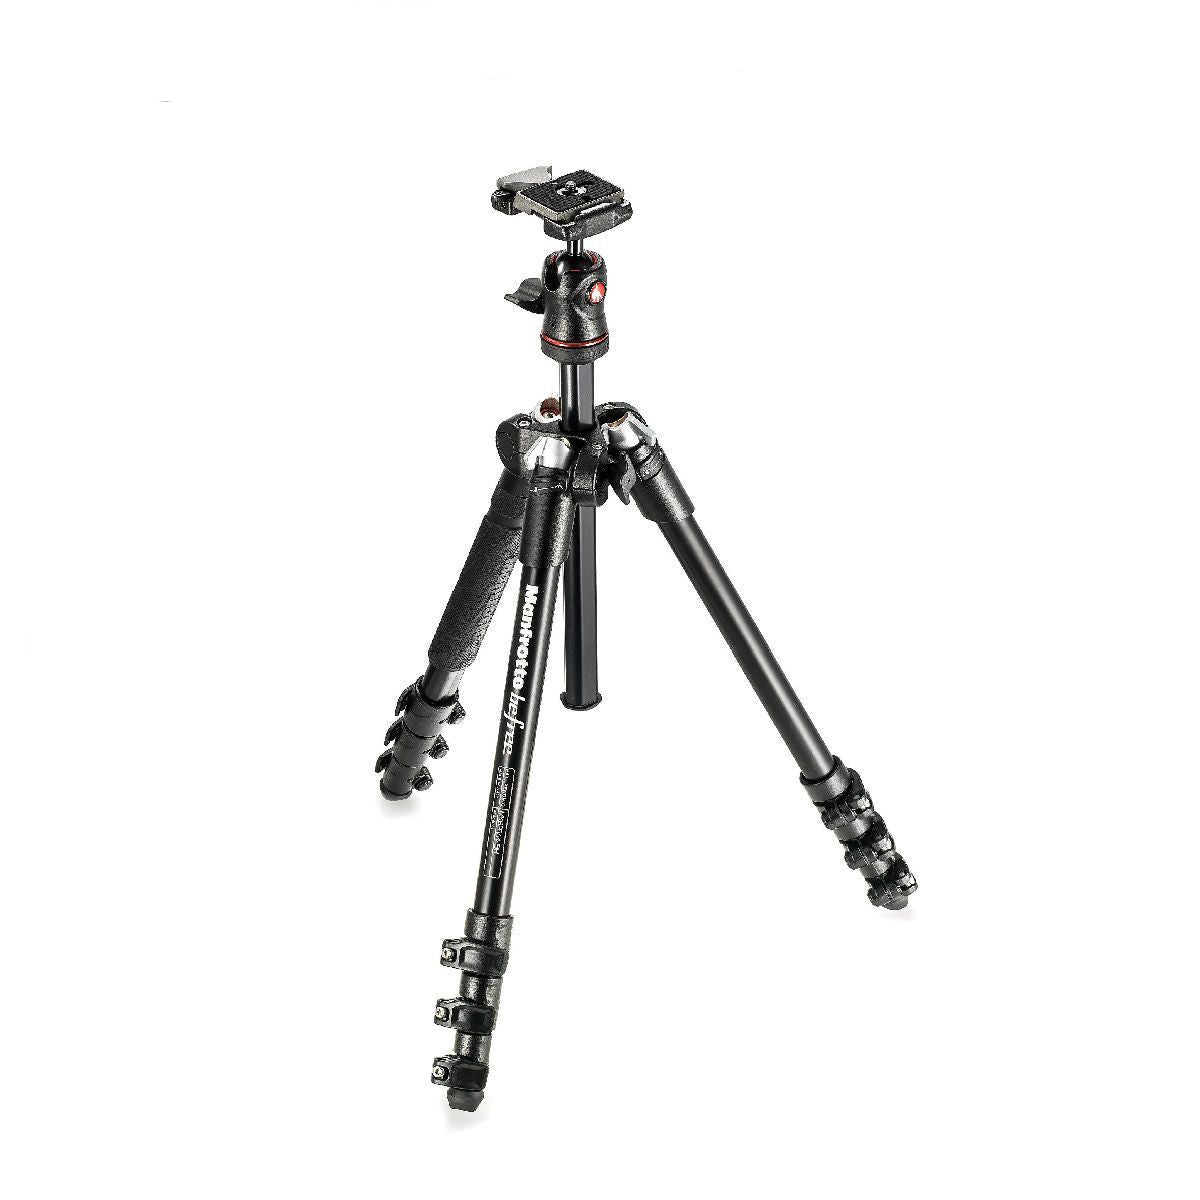 Manfrotto Befree Compact Travel Aluminum Alloy Tripod